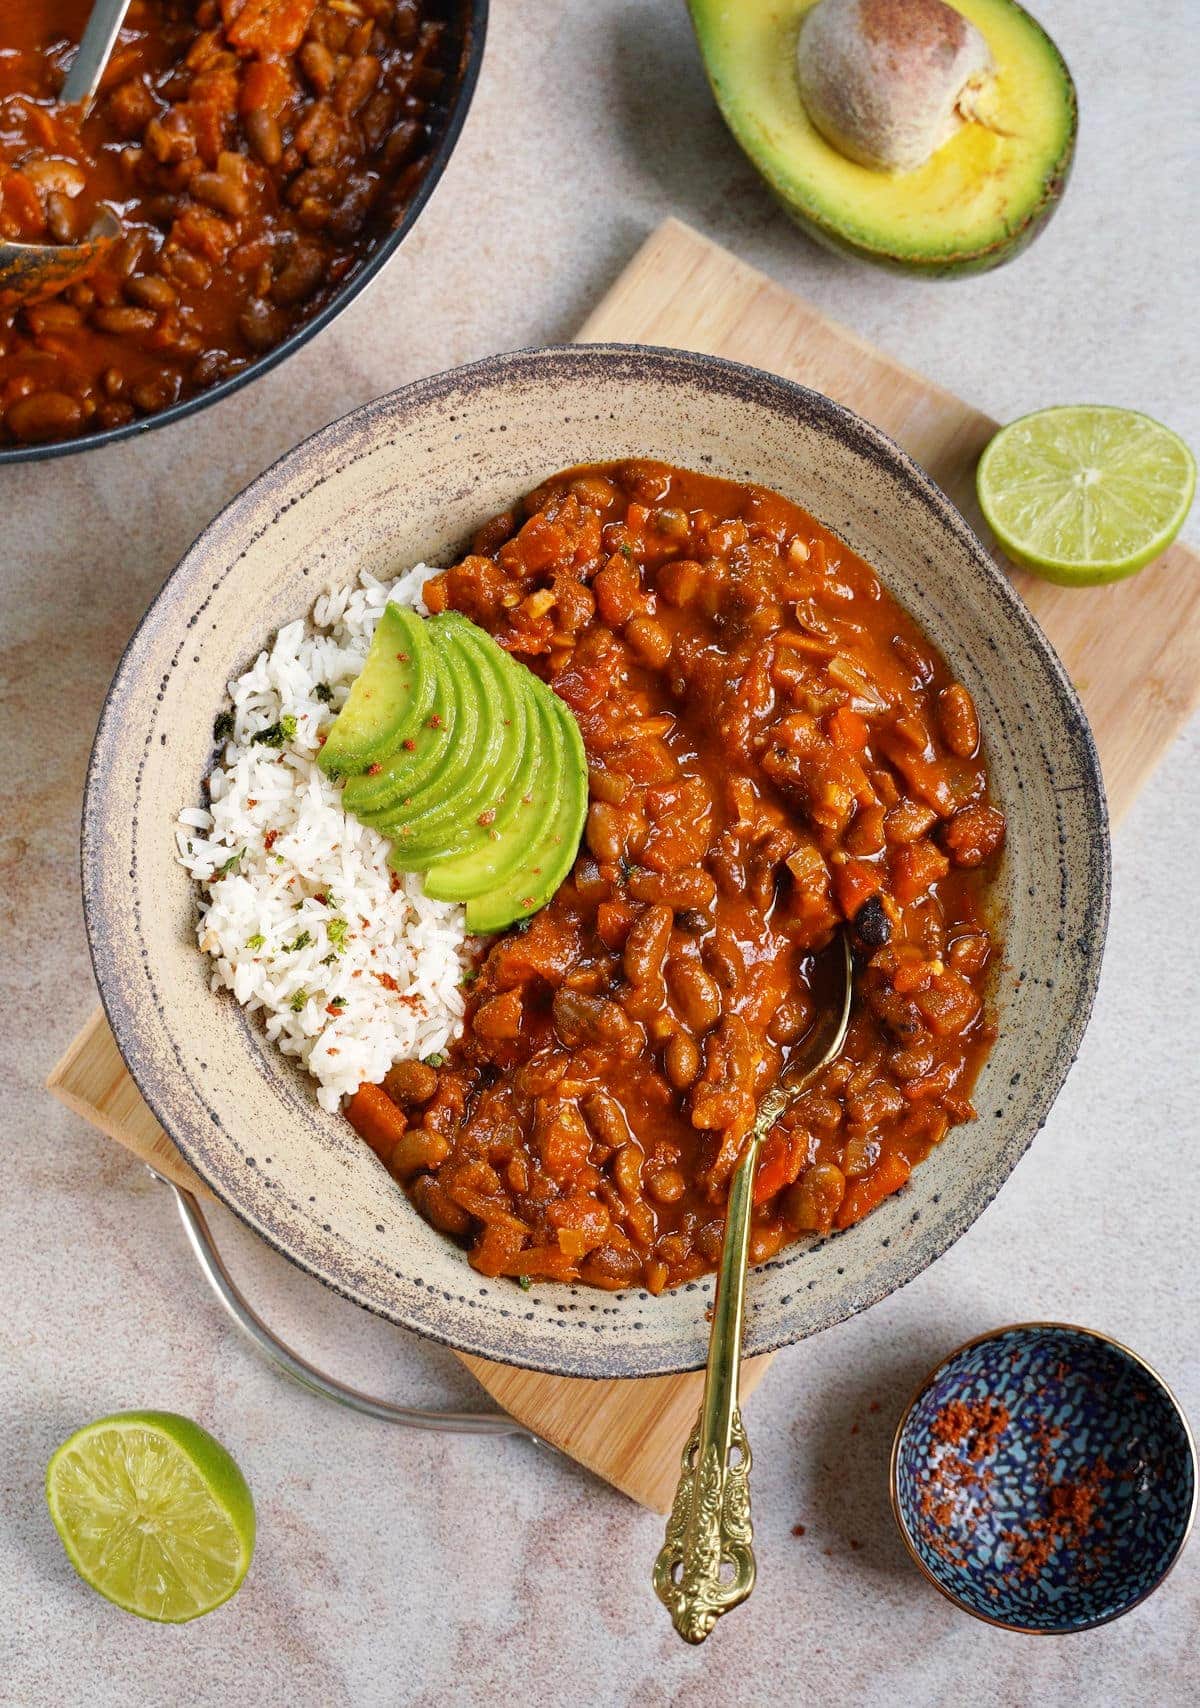 top shot of vegan chili sin carne with rice and avocado